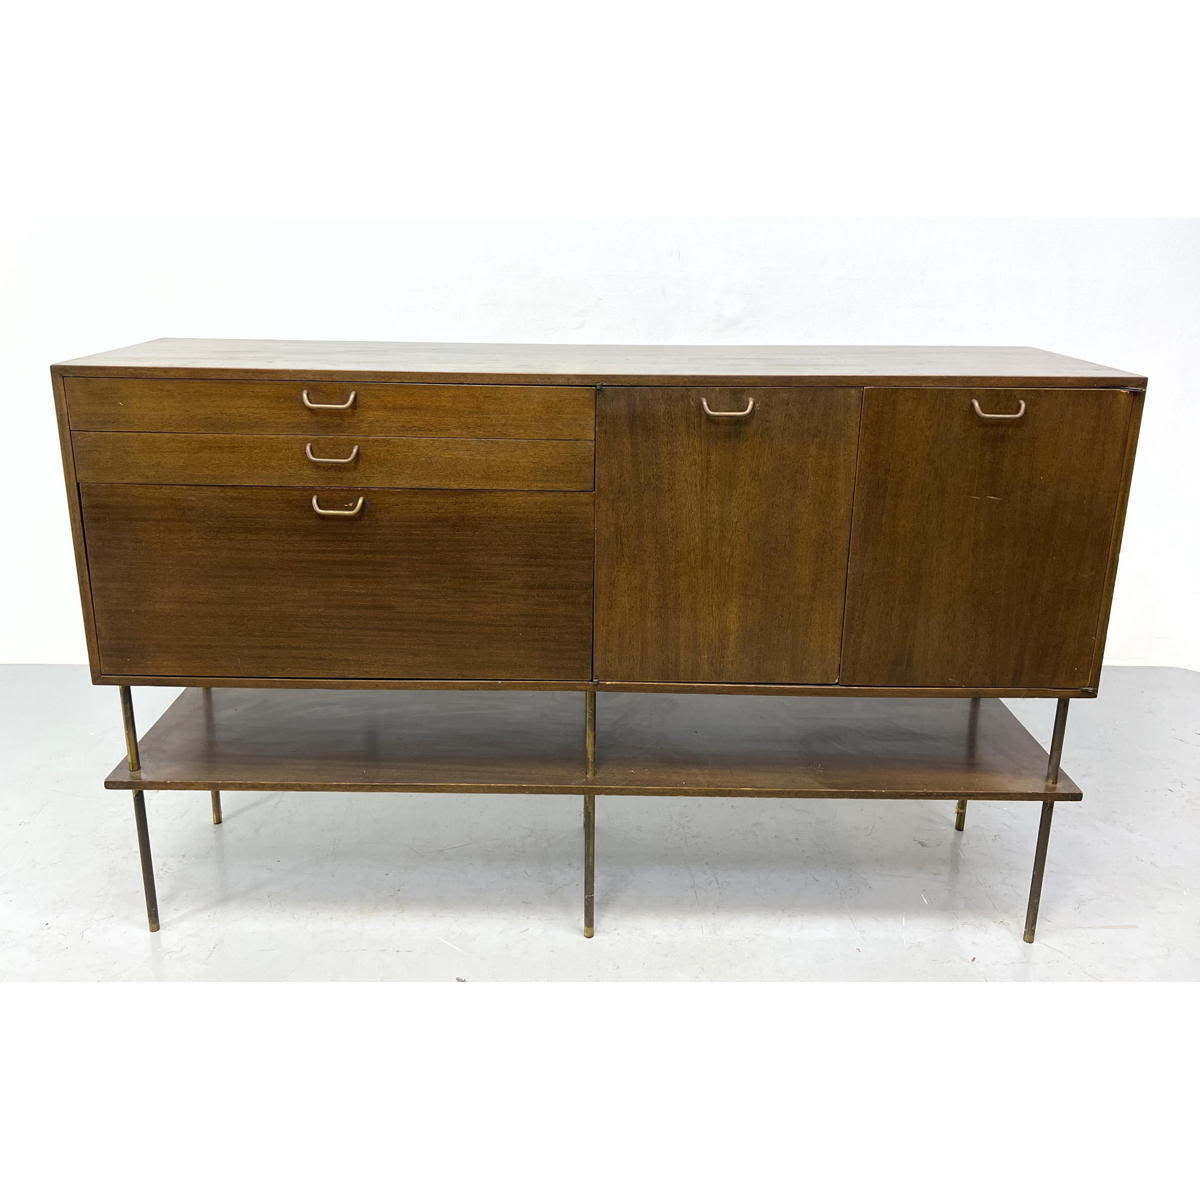 Harvey Probber Tall Credenza Sideboard 2a77ca